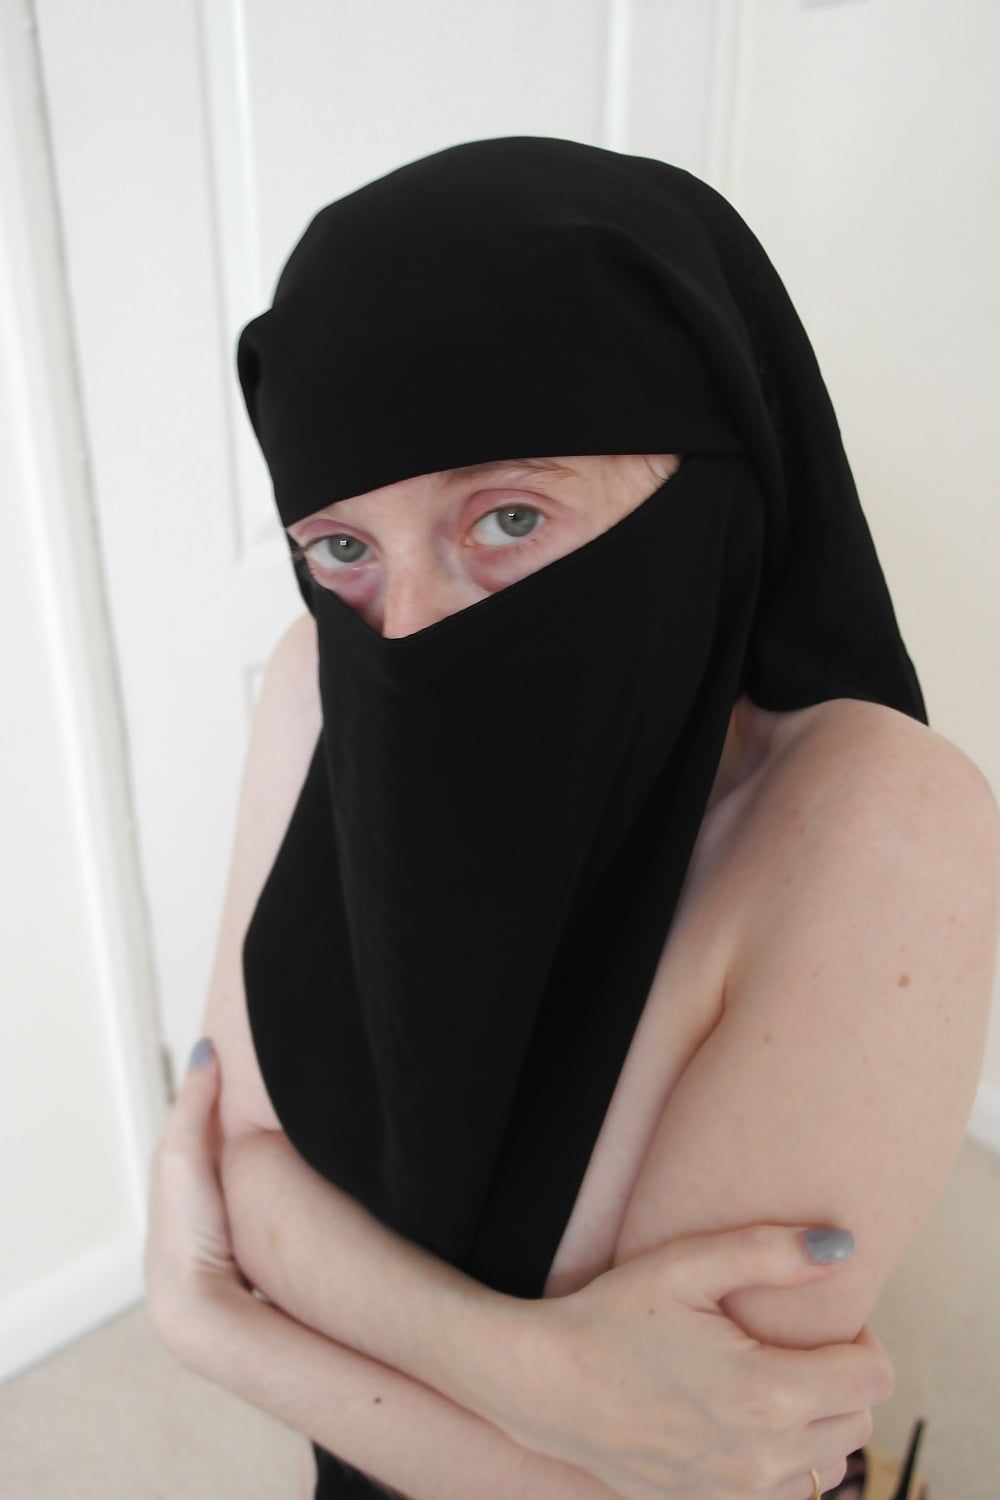 Shy Wife Naked in Niqab and Heels #9